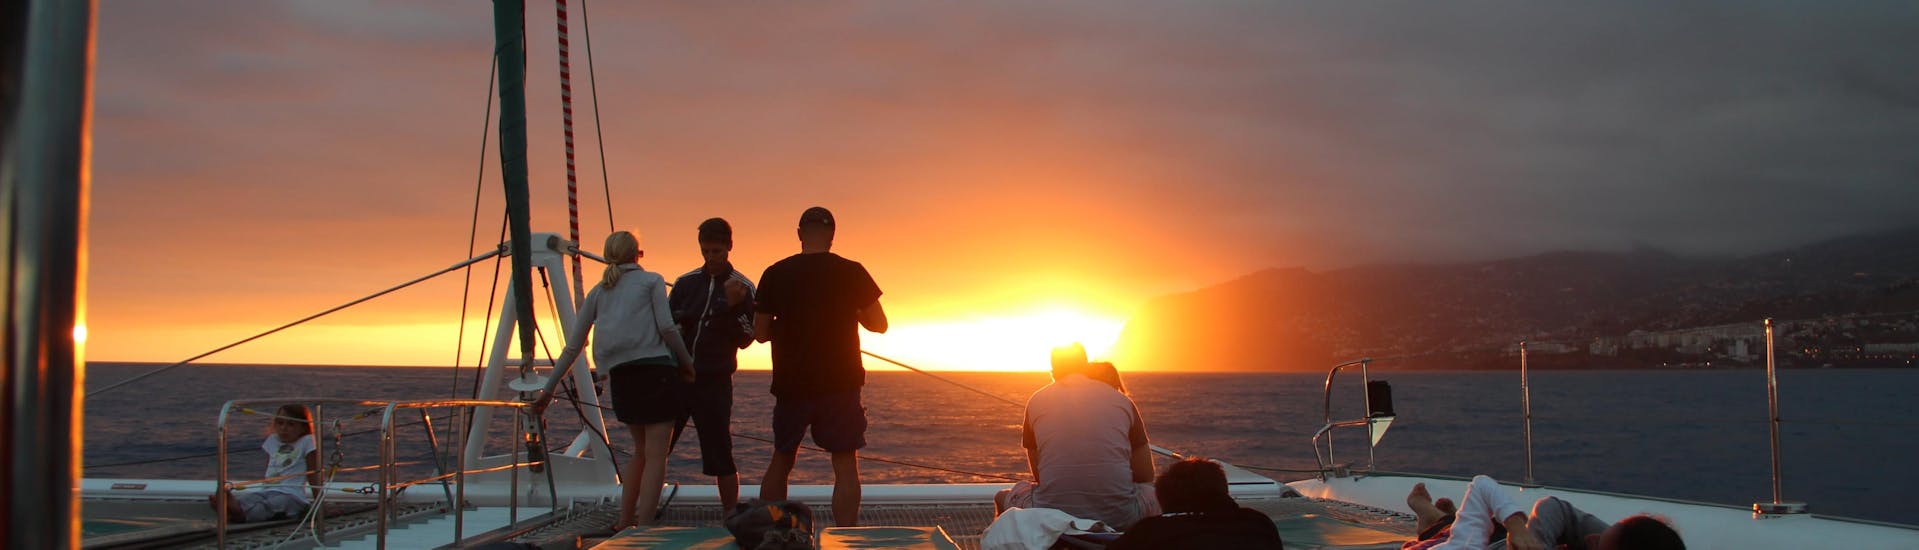 Sunset Catamaran Tour with Dolphin and Whale Watching with VMT Madeira - Hero image